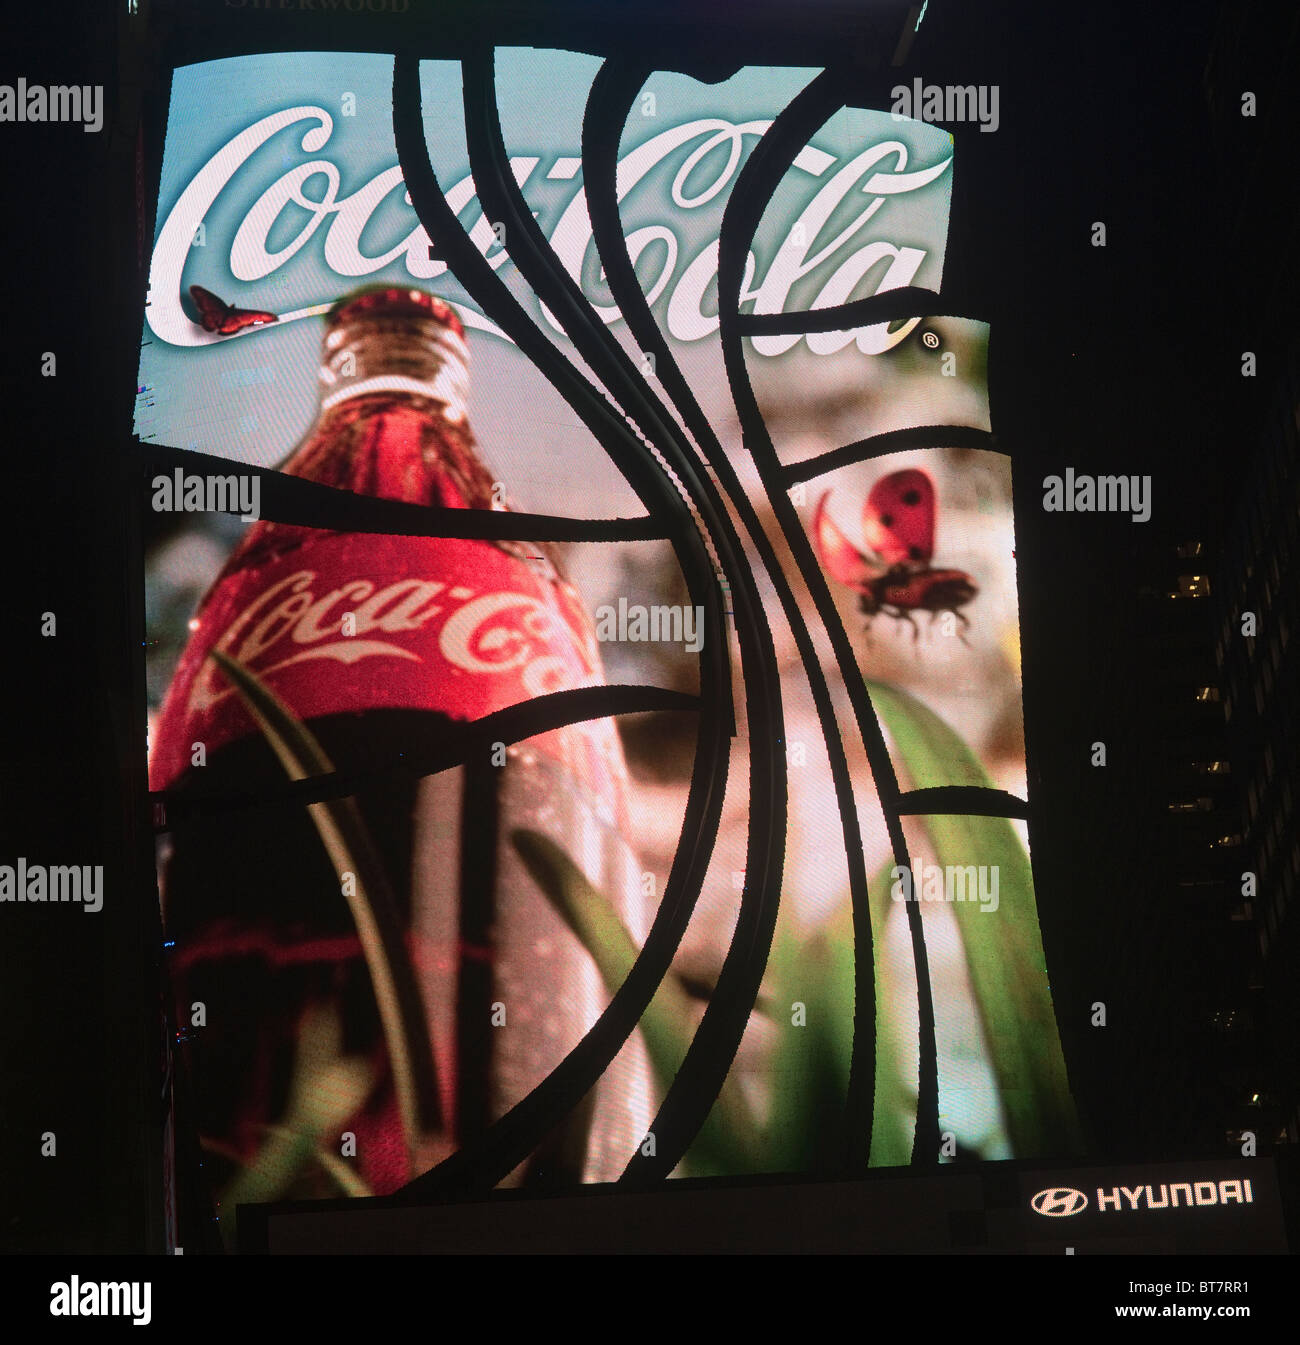 Coca-Cola's illuminated high-tech sign in Times Square in New York Stock Photo